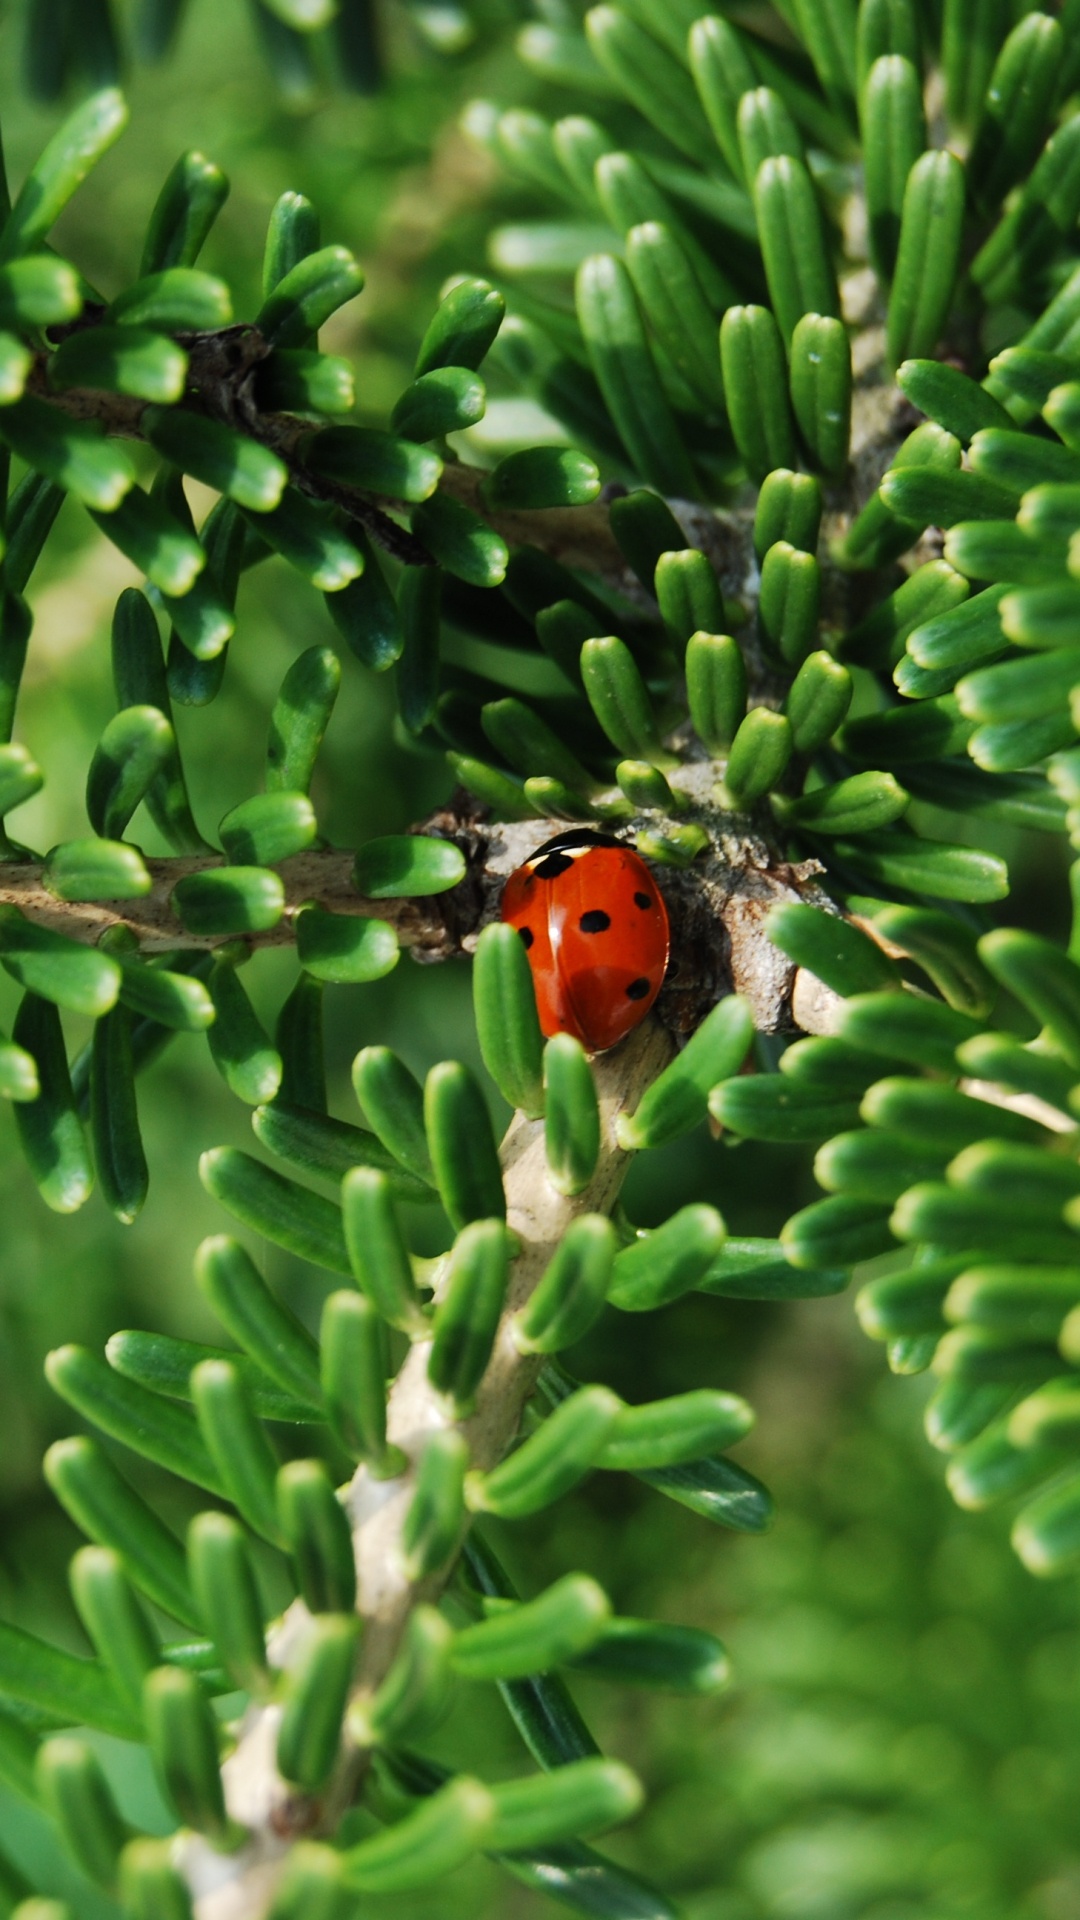 Red and Black Ladybug on Green Plant During Daytime. Wallpaper in 1080x1920 Resolution